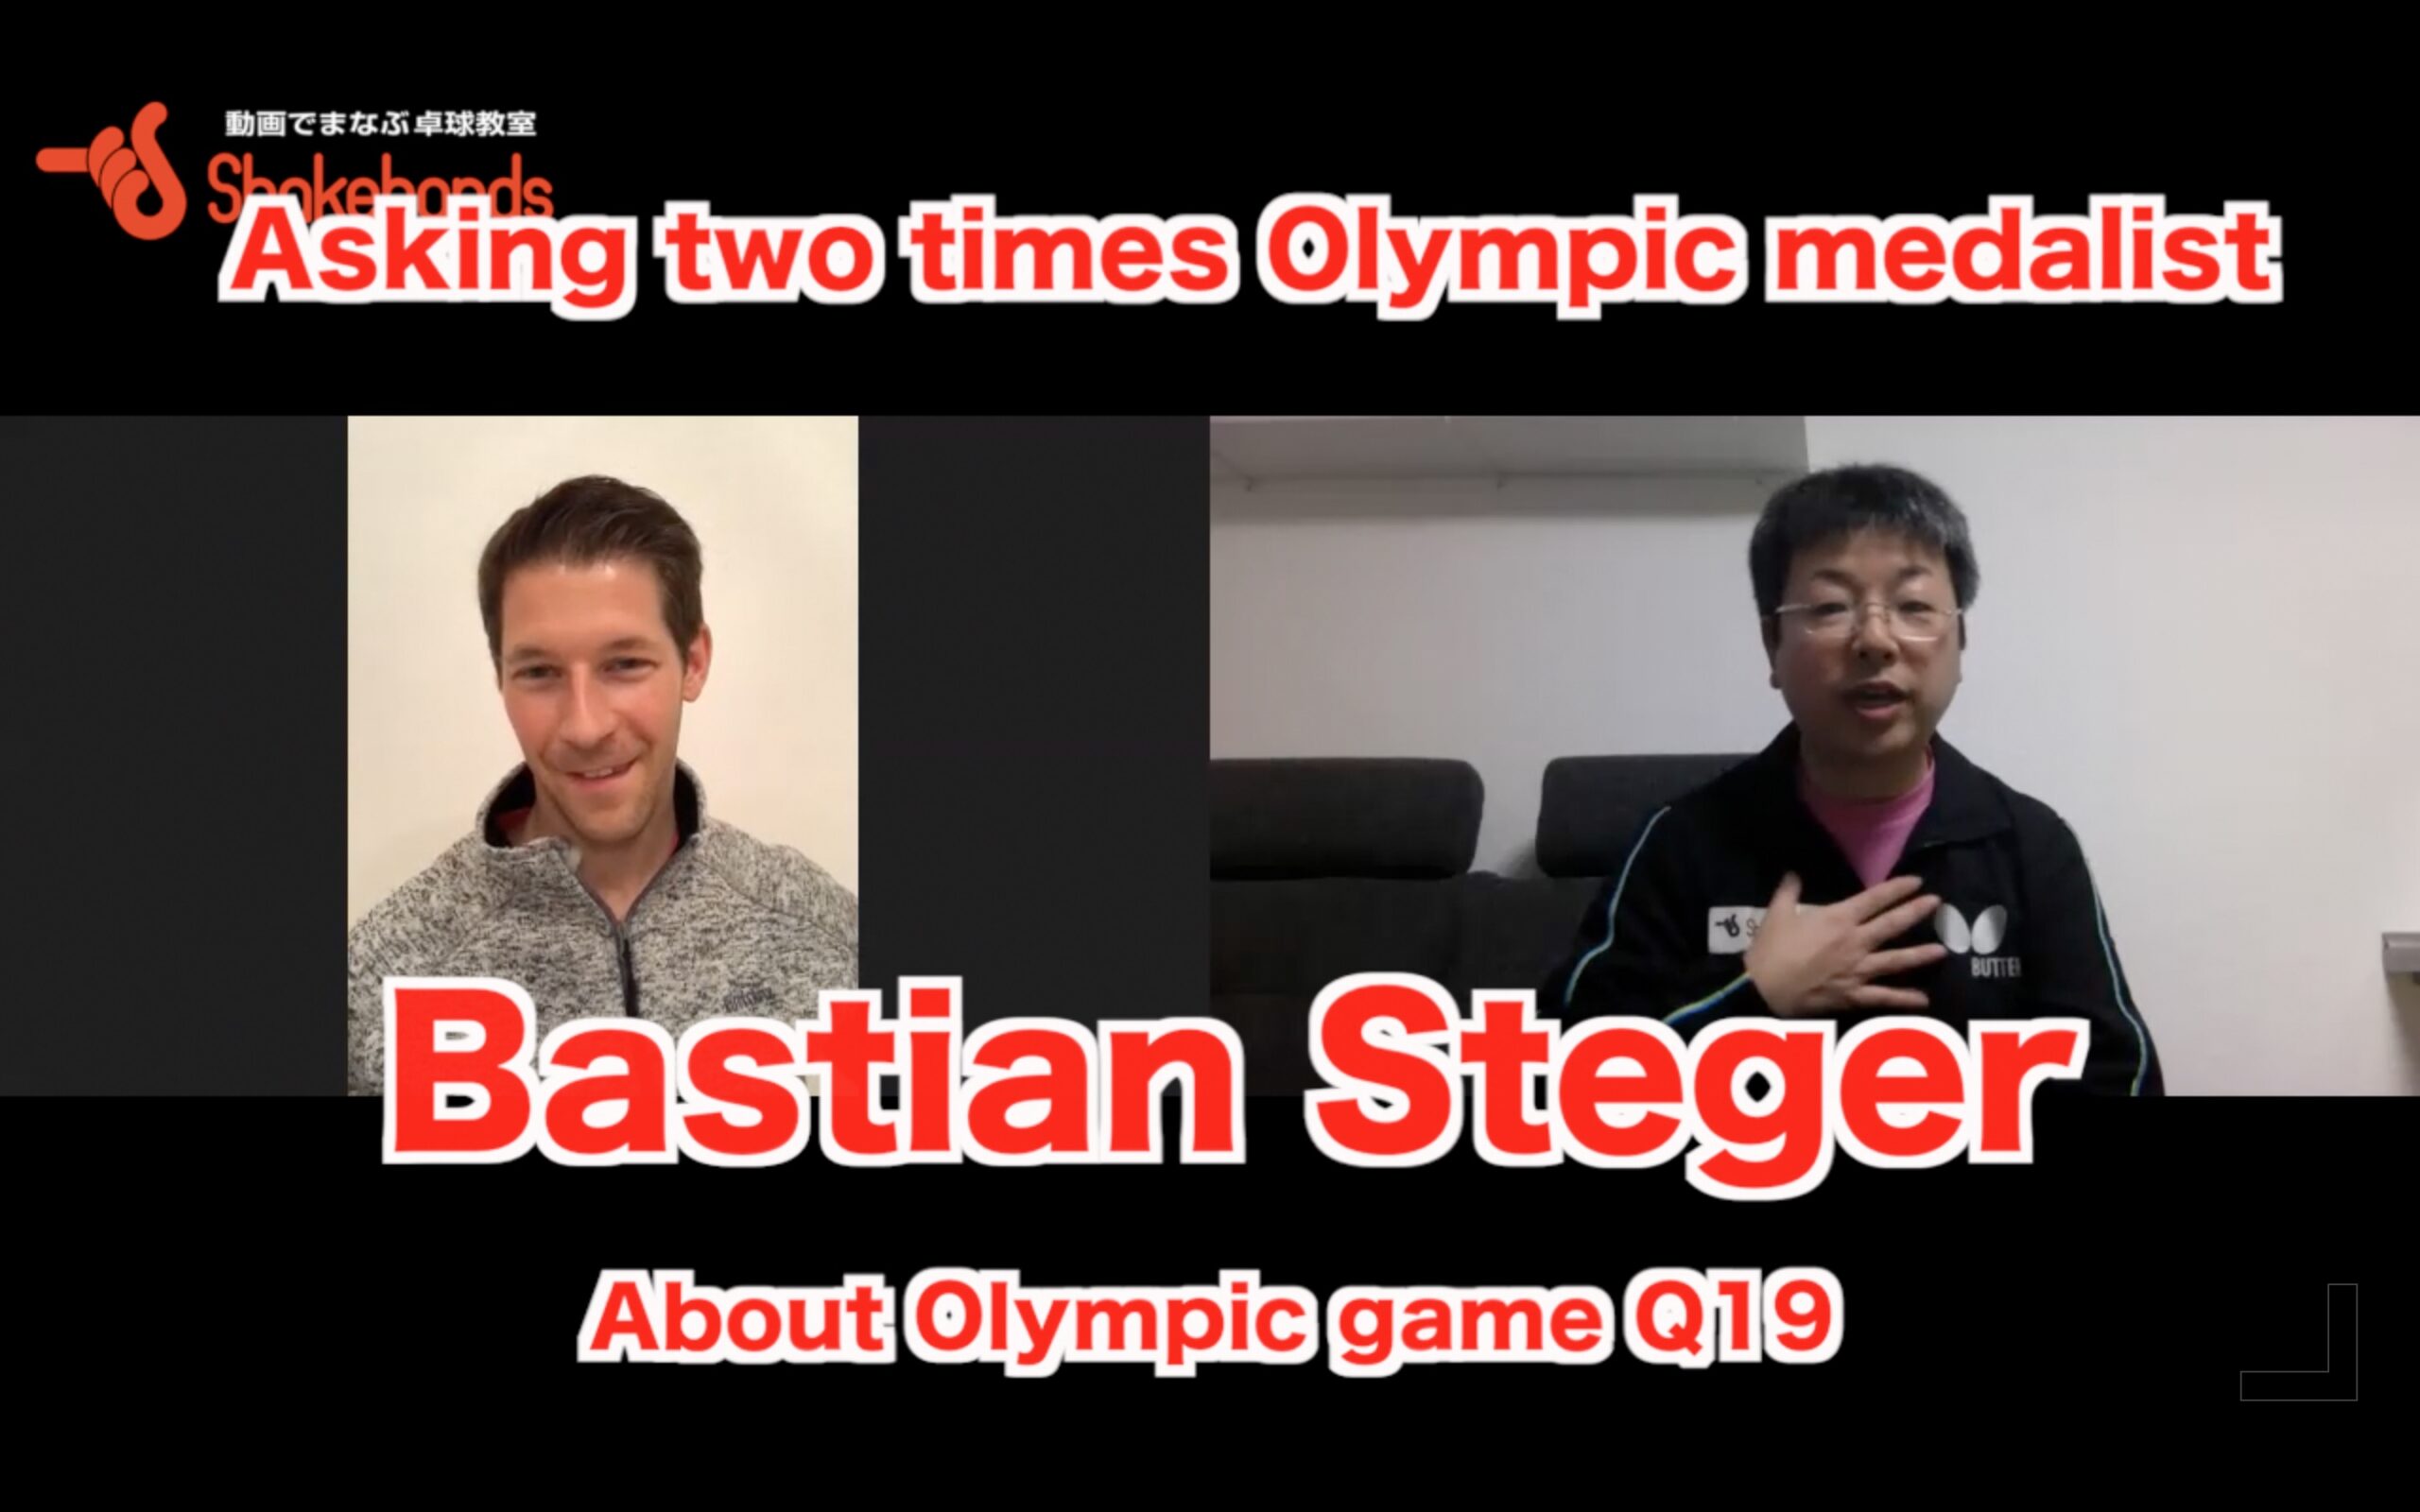 About Olympic games Q19